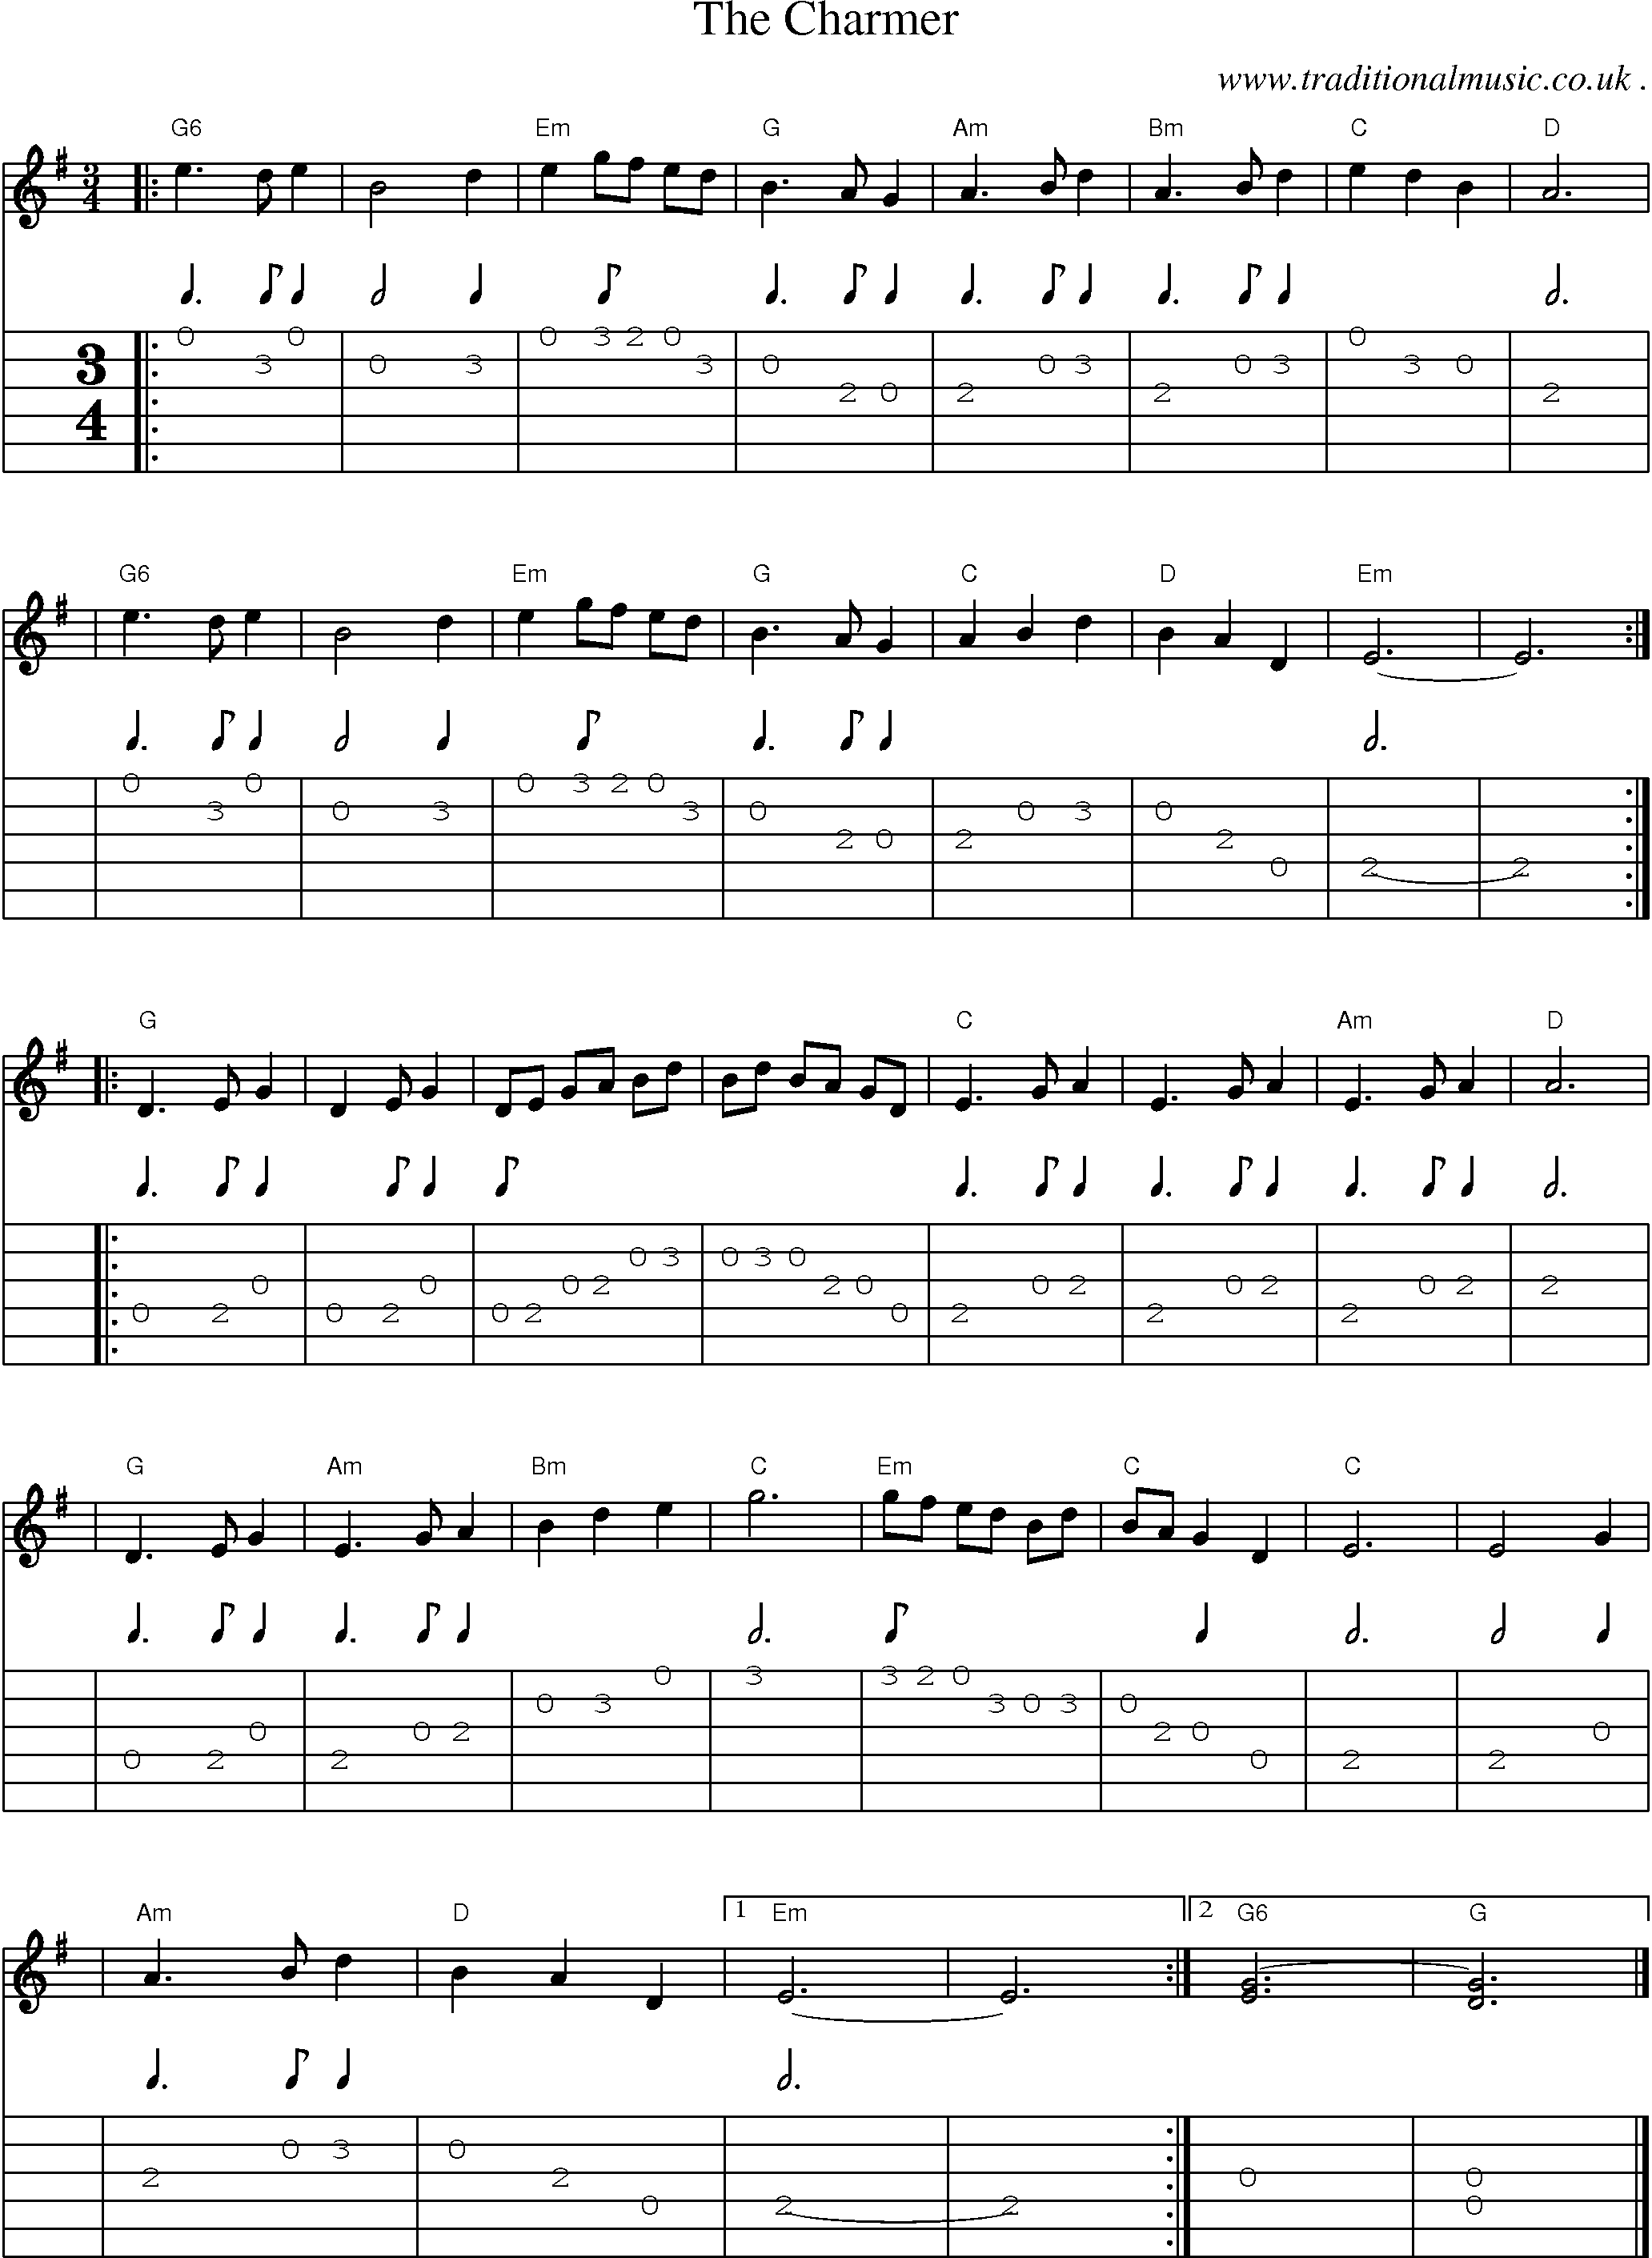 Sheet-music  score, Chords and Guitar Tabs for The Charmer